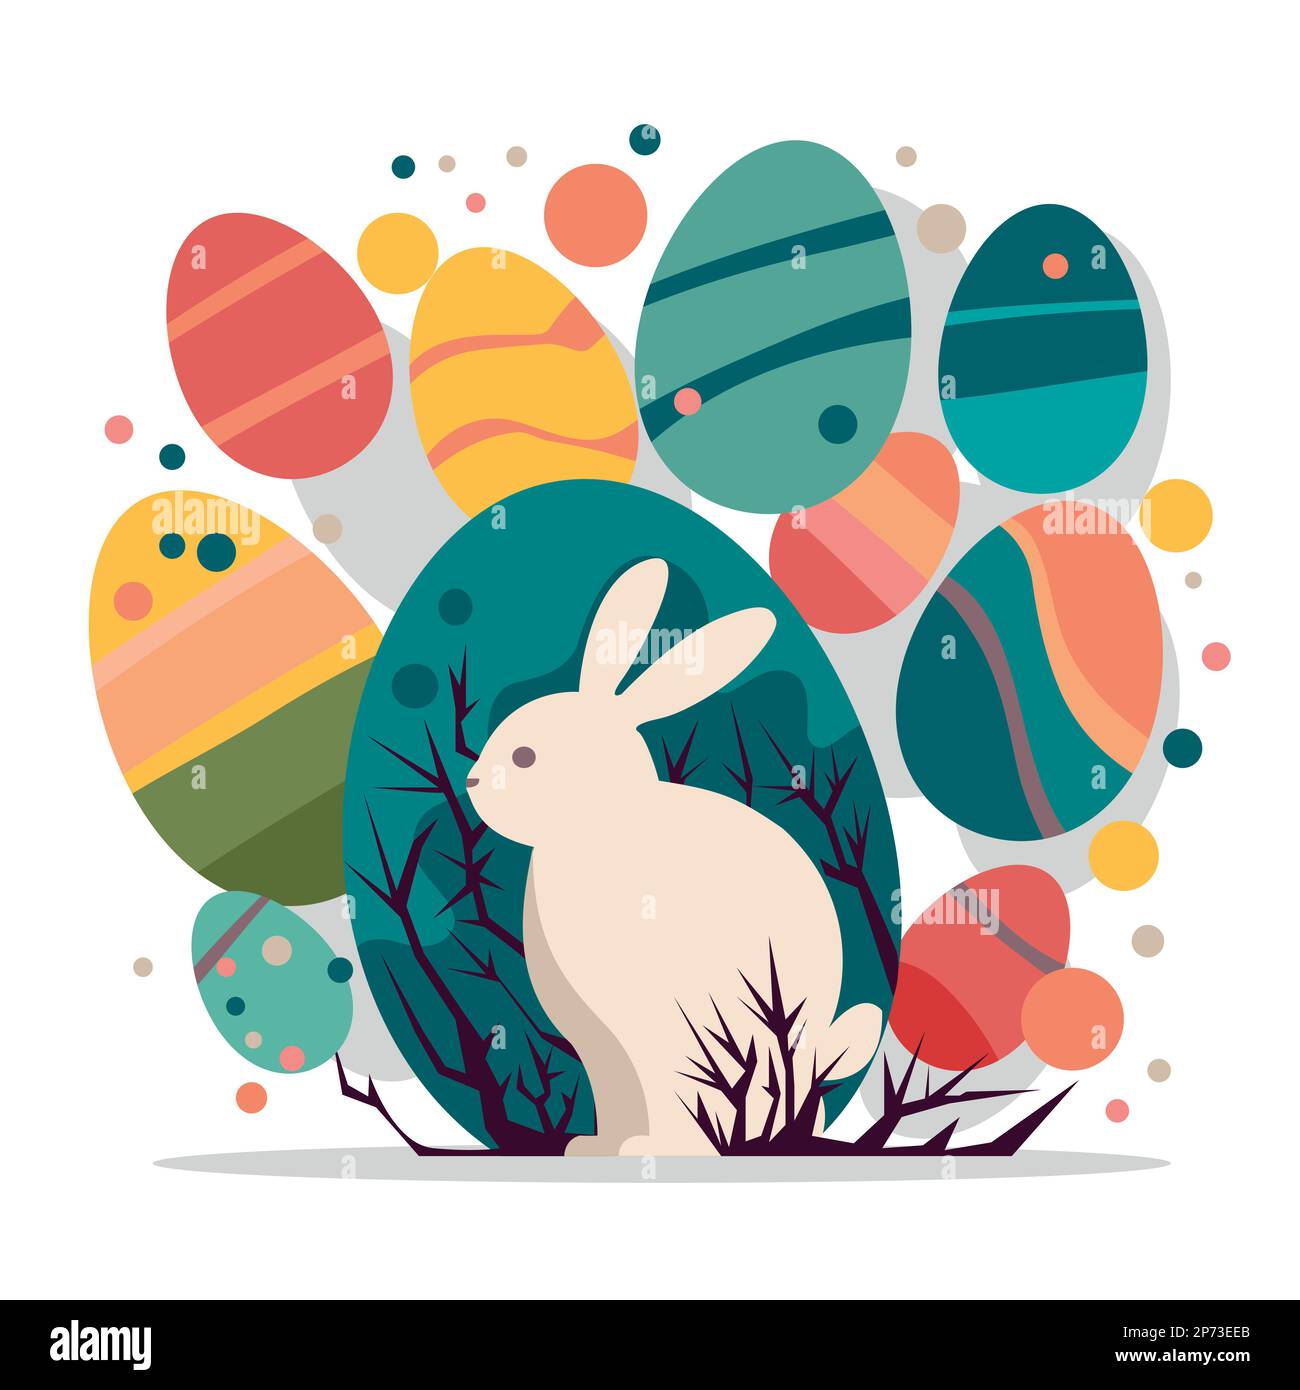 Cute abstract illustration of an Easter bunny surrounded by plants, flowers and colorful Easter eggs. Greeting card, postcard and flat icon of an East Stock Vector